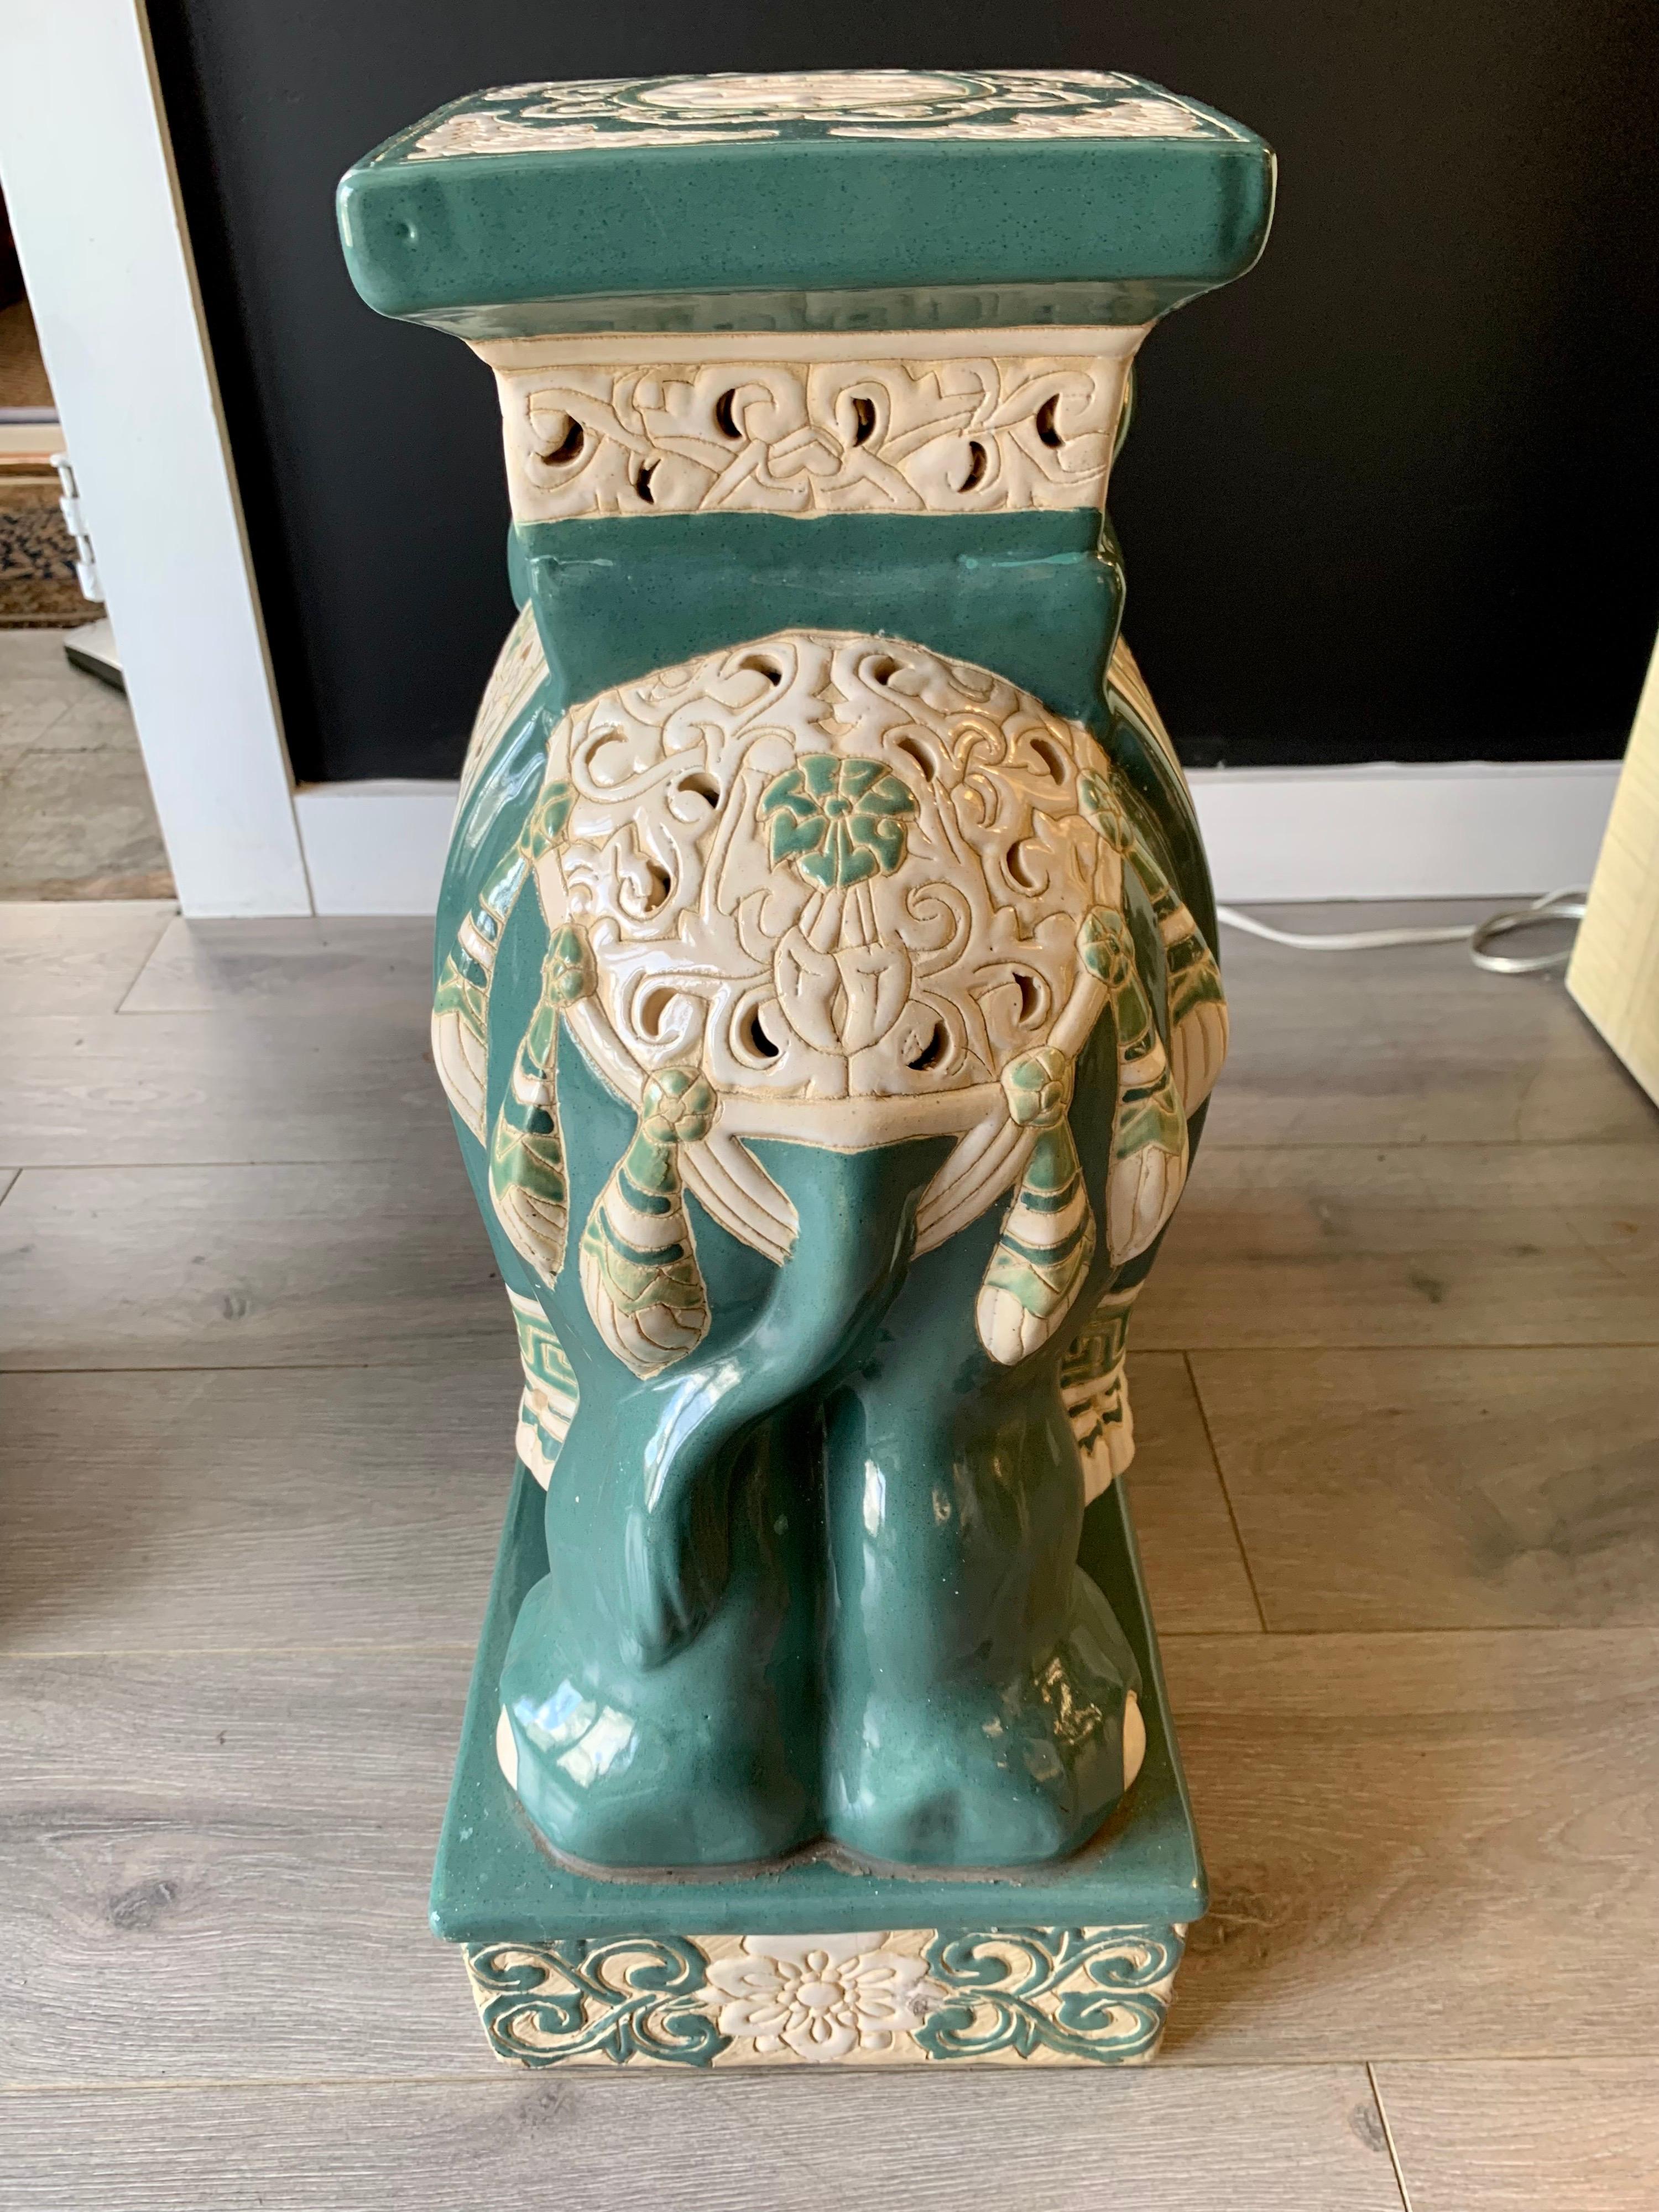 Elegant and coveted Chinese porcelain garden stool/seat. What sets this one apart from the competition is the color scheme - note the greens! Now more than ever, home is where the heart is.